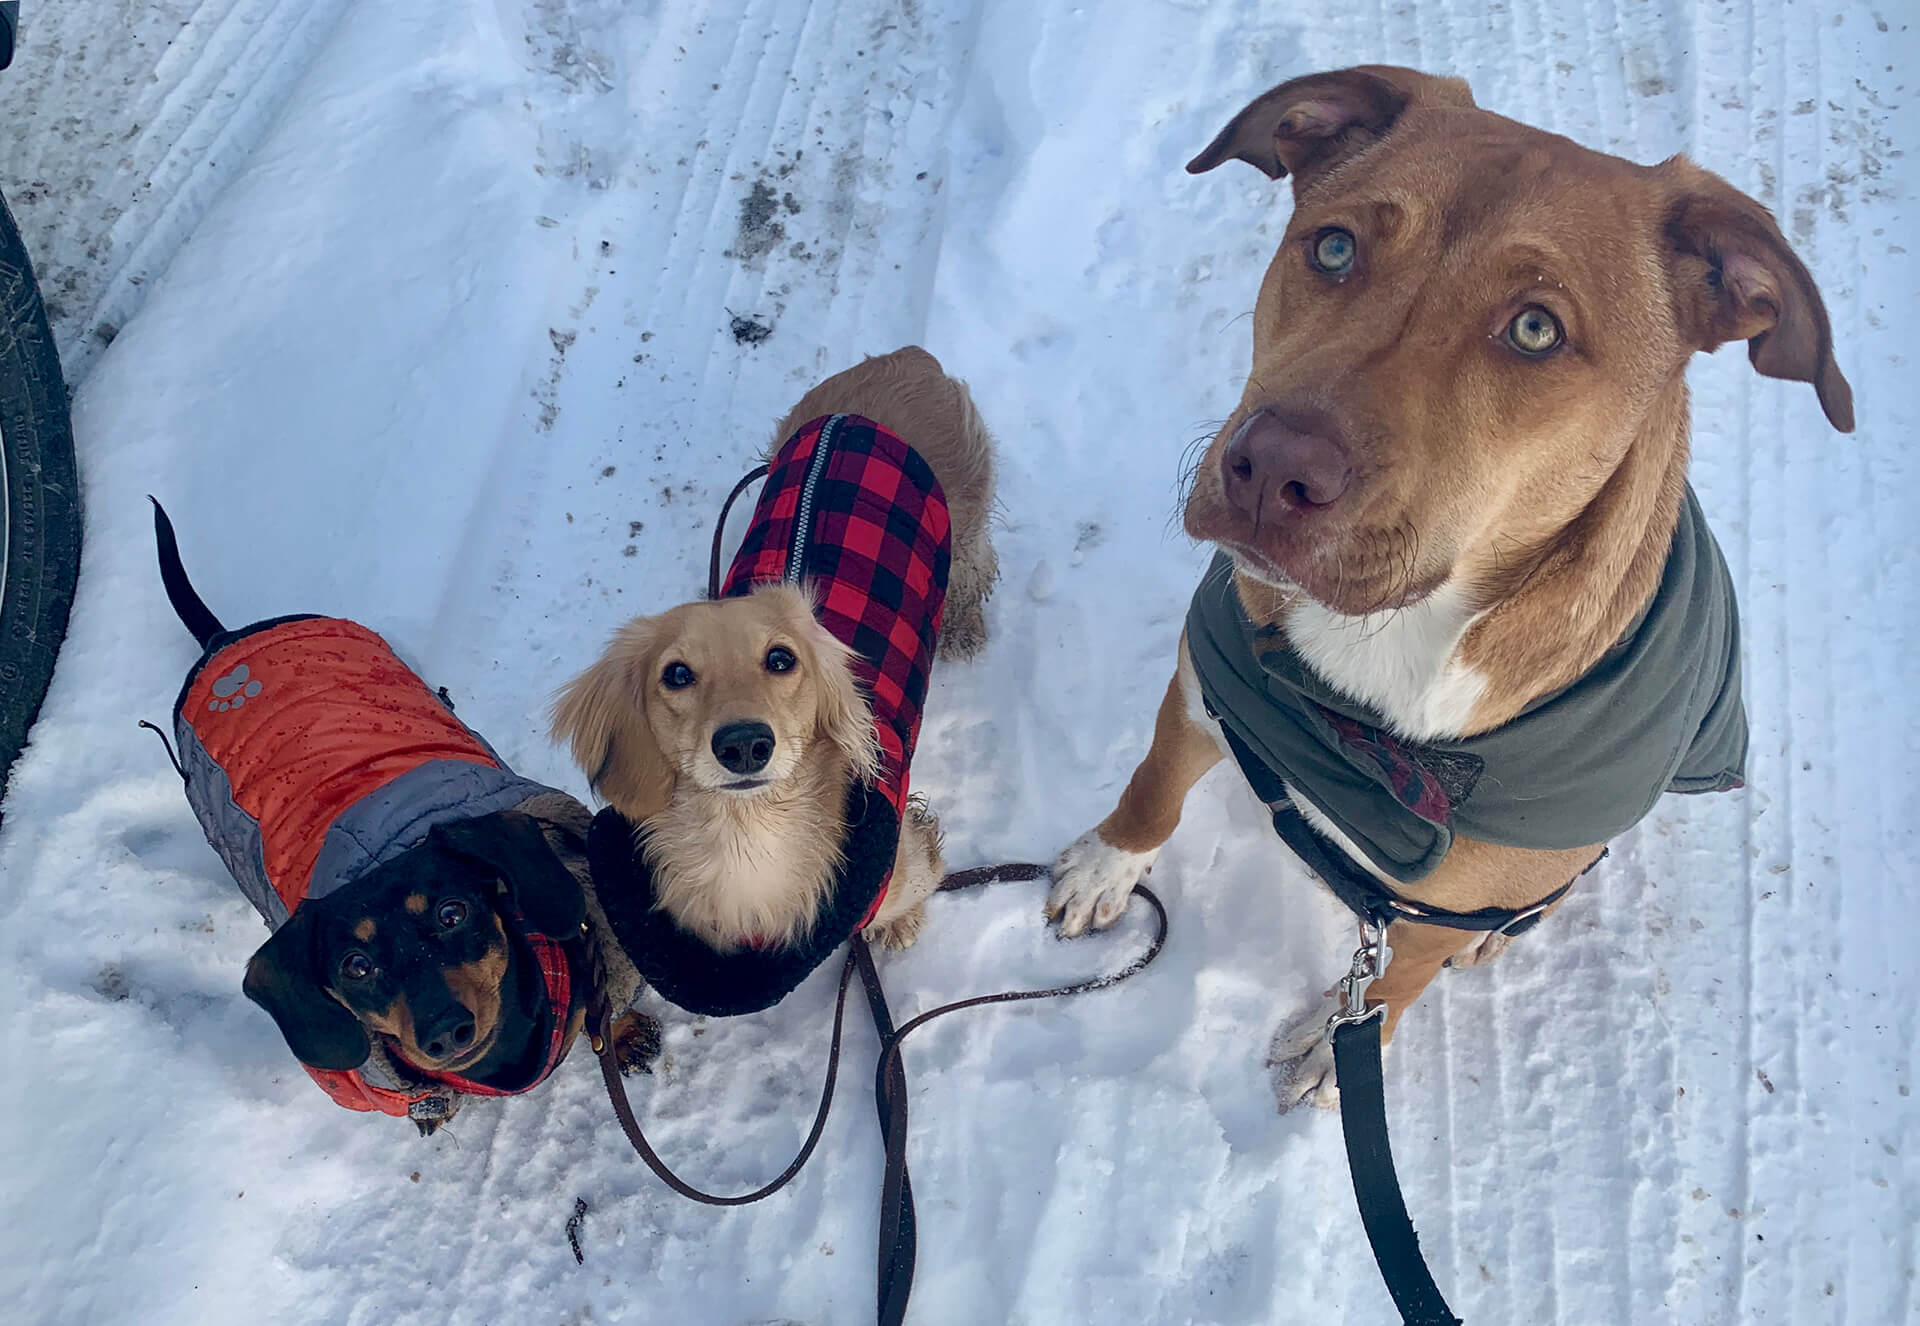 Three dogs geared up for the snow